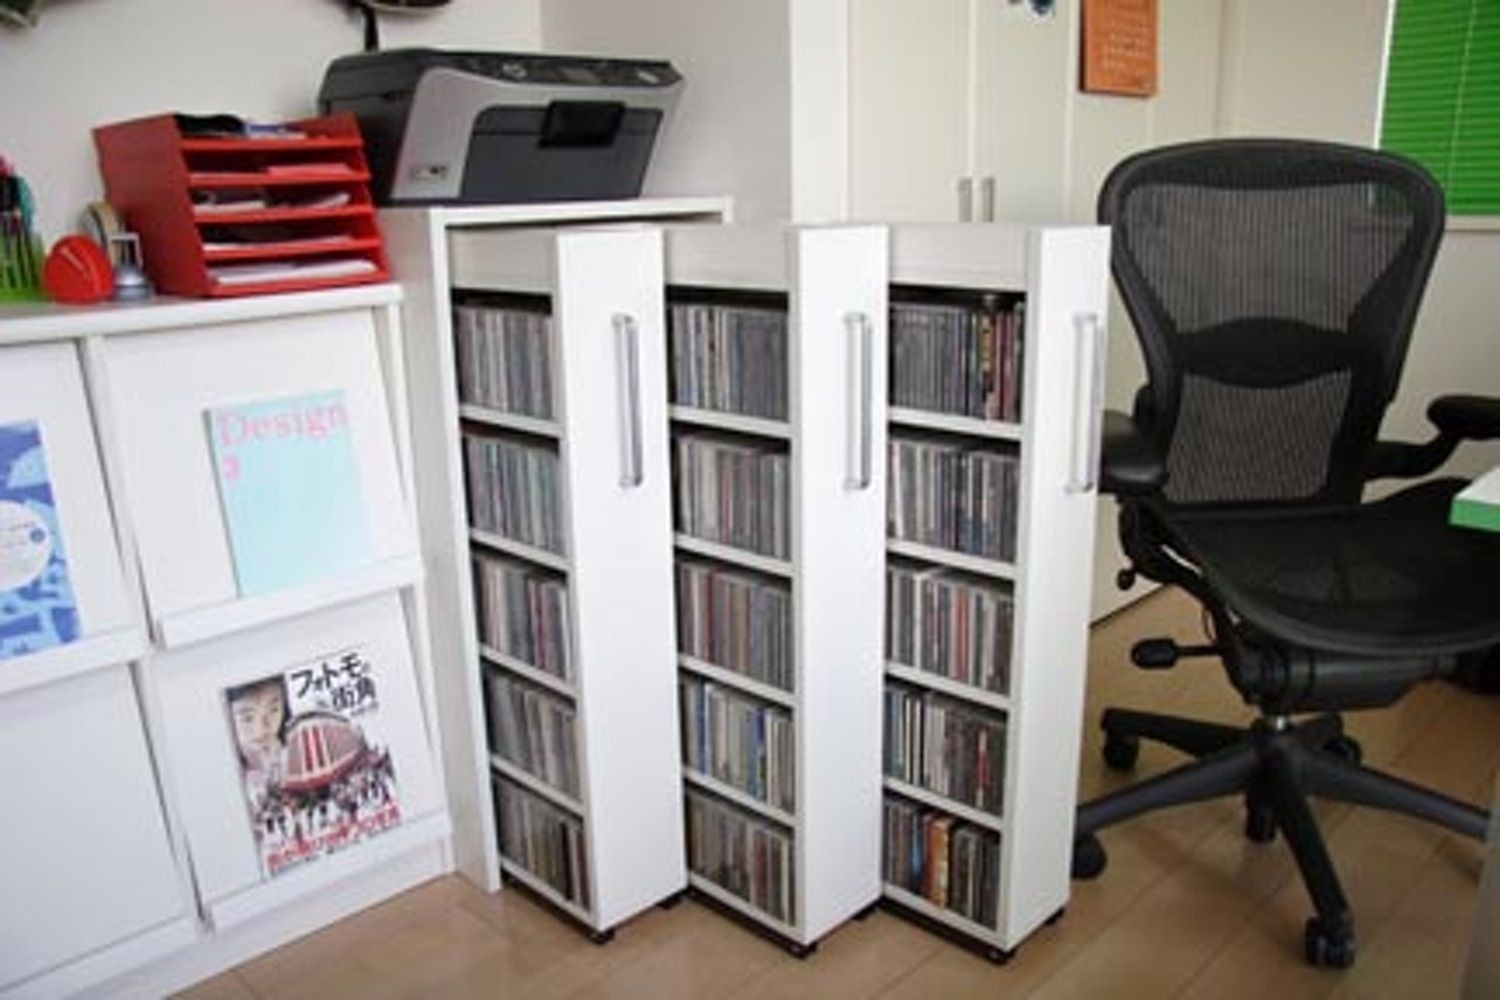 Library Catalog Media Storage Cabinet - 24 Drawers - Stores 456 CDs or 192  DVDs